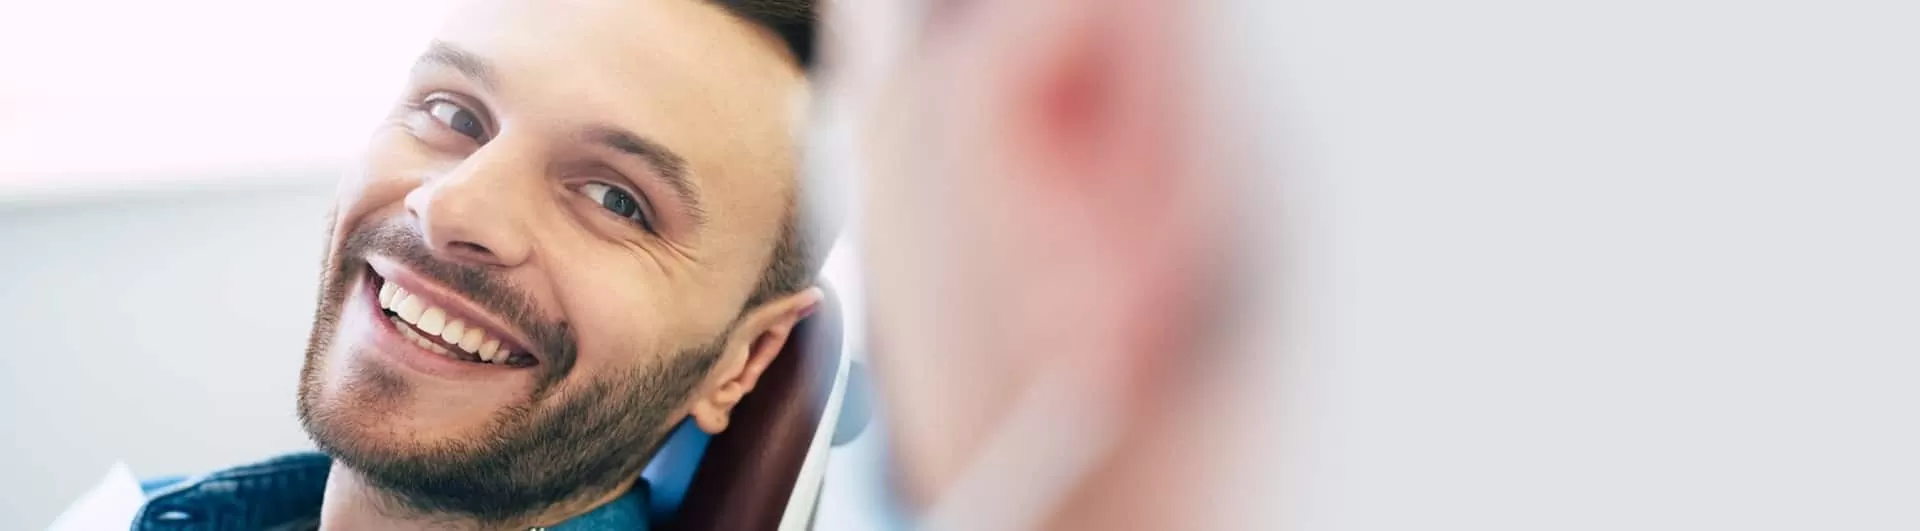 Young bearded man smiling in Hamilton dental chair